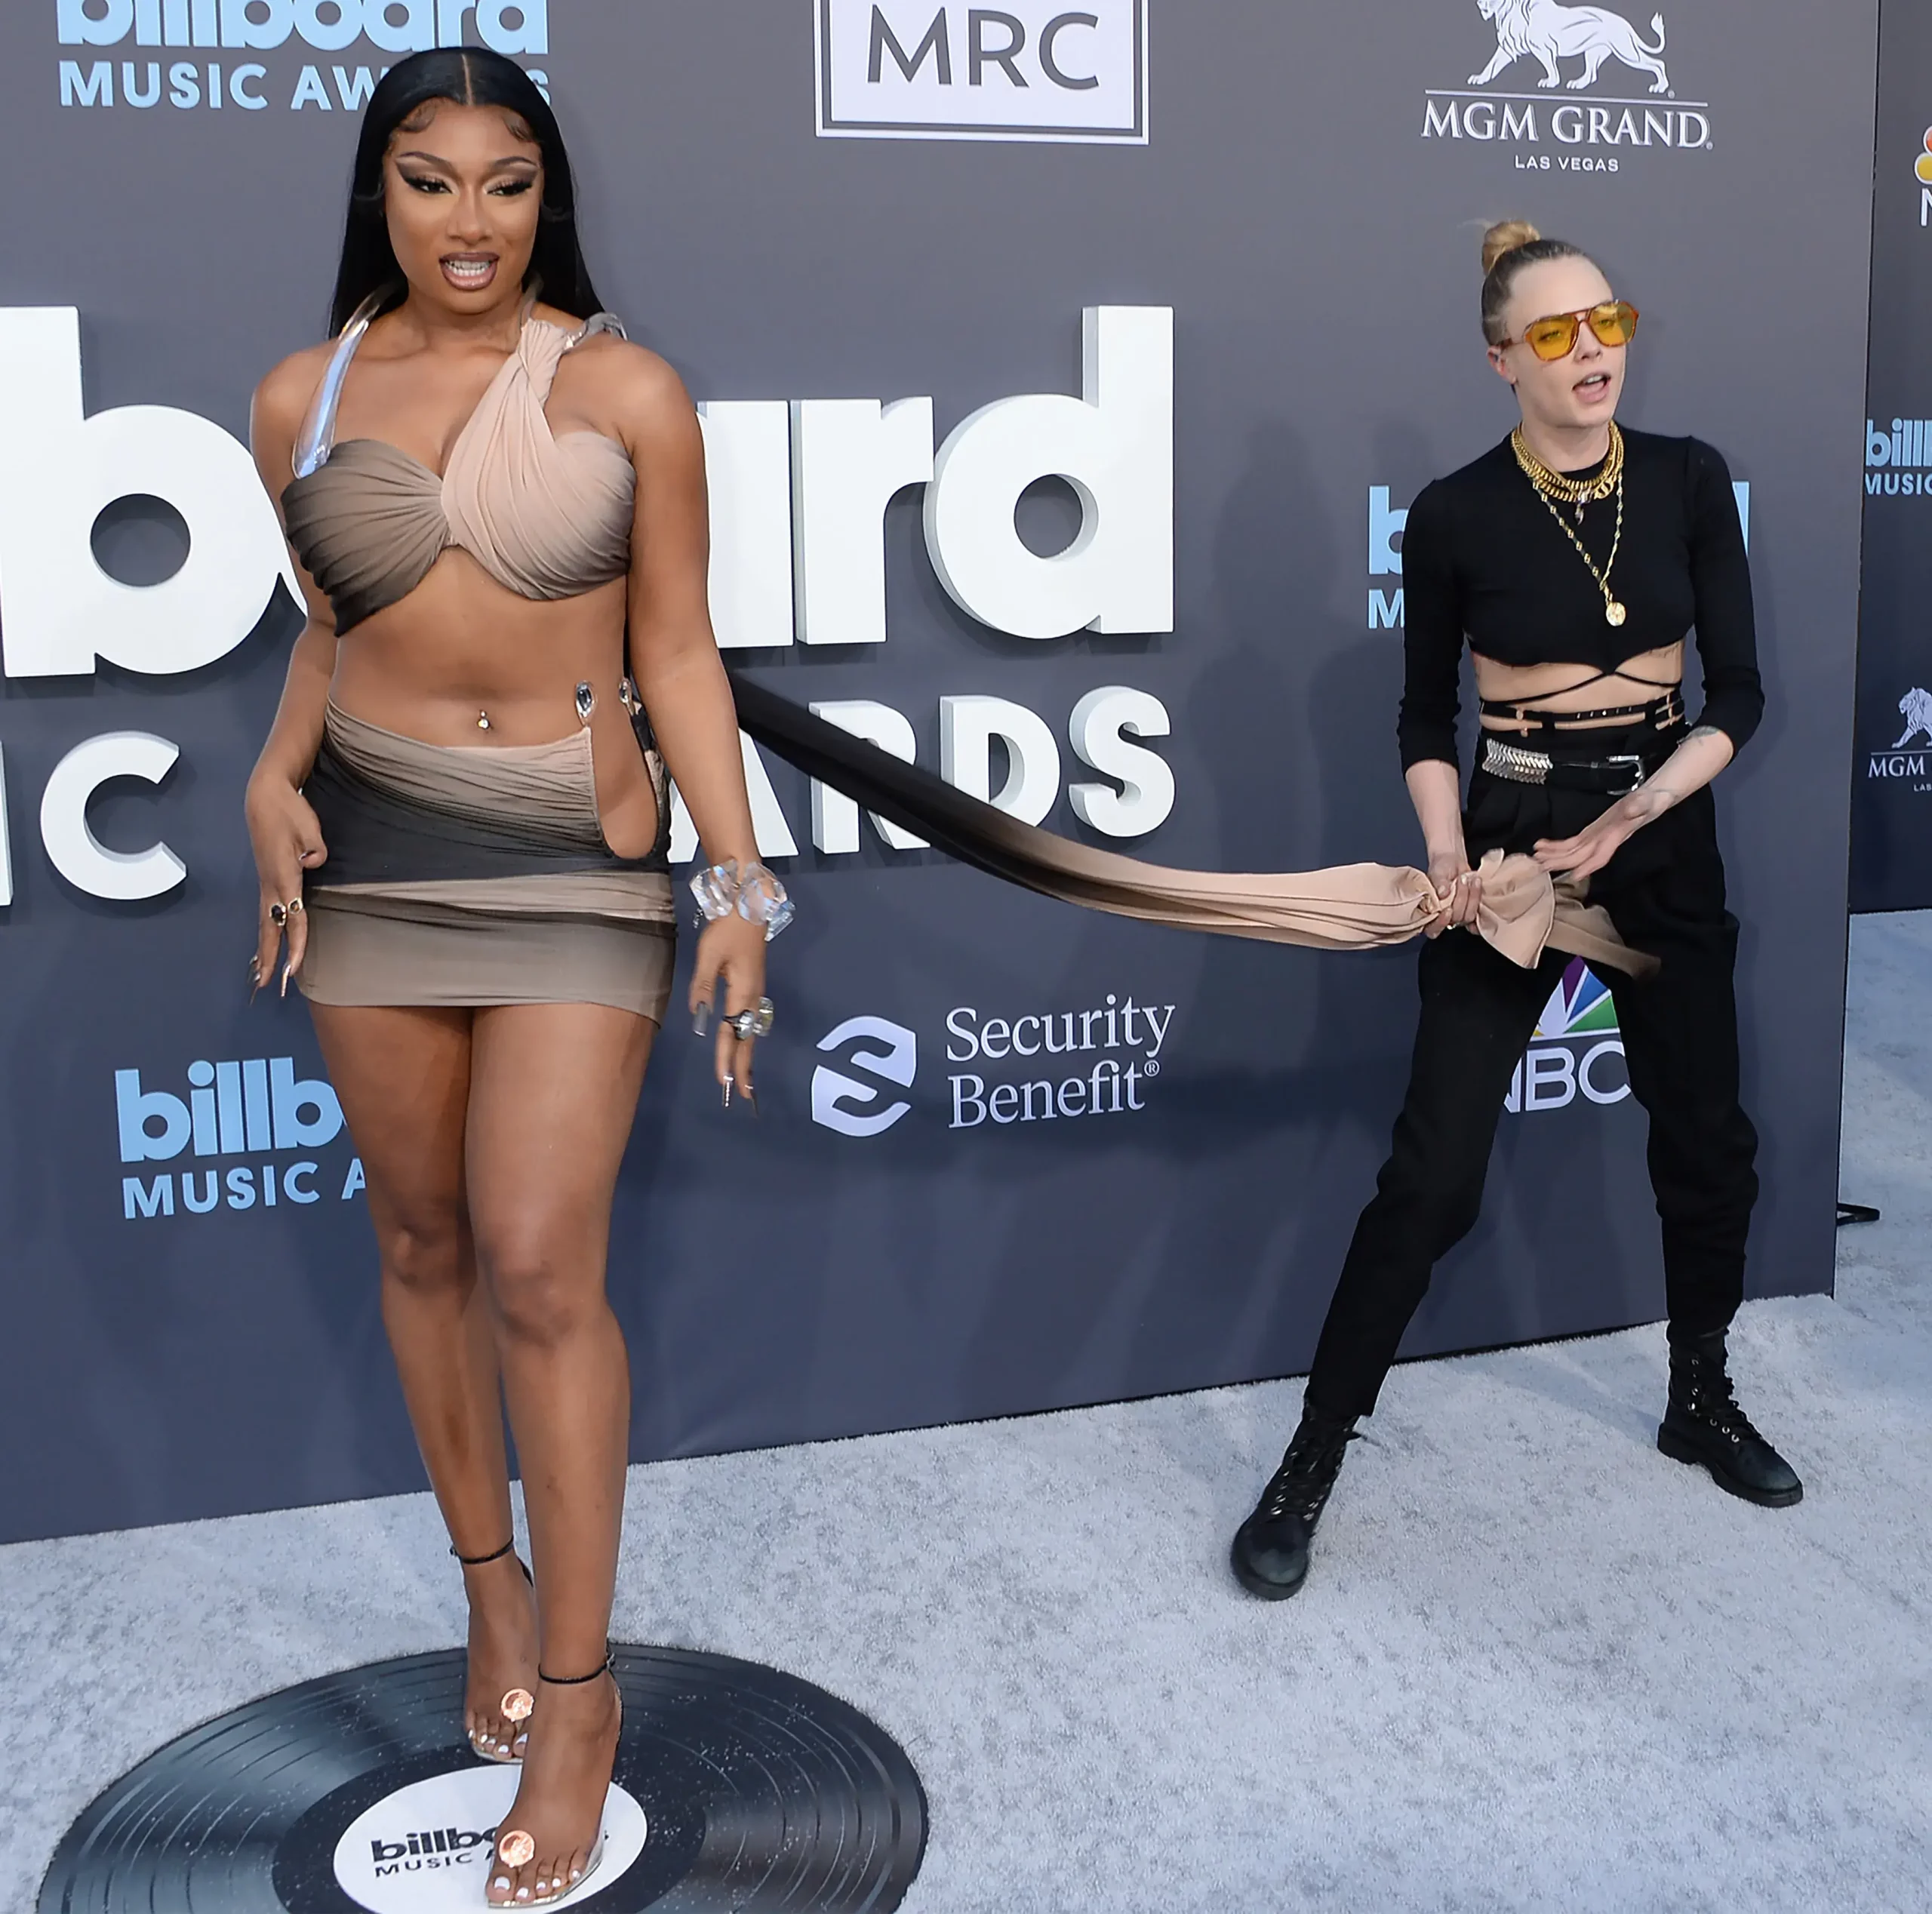 Cara Delevingne with Megan Thee Stallion at the Billboard Music Awards 2022